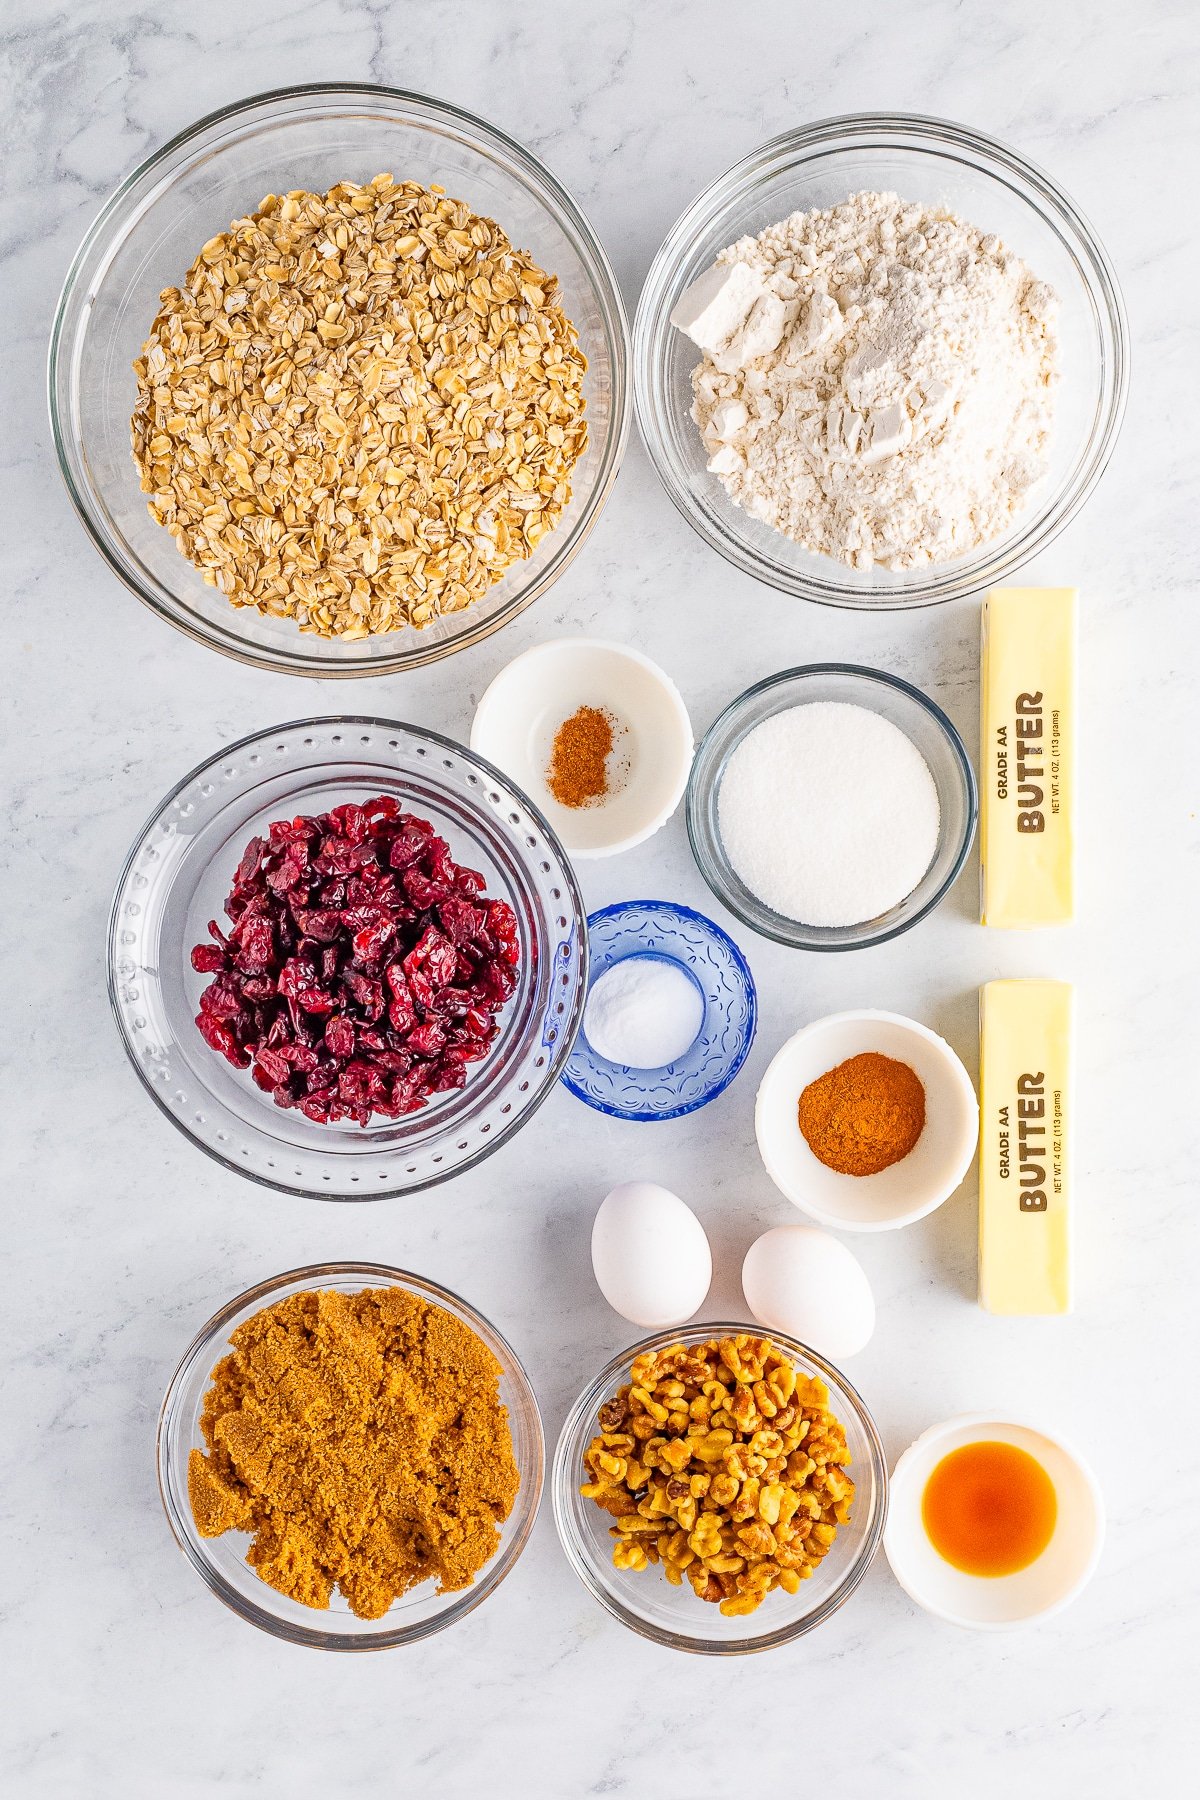 ingredients needed to make Cranberry Oatmeal Cookies